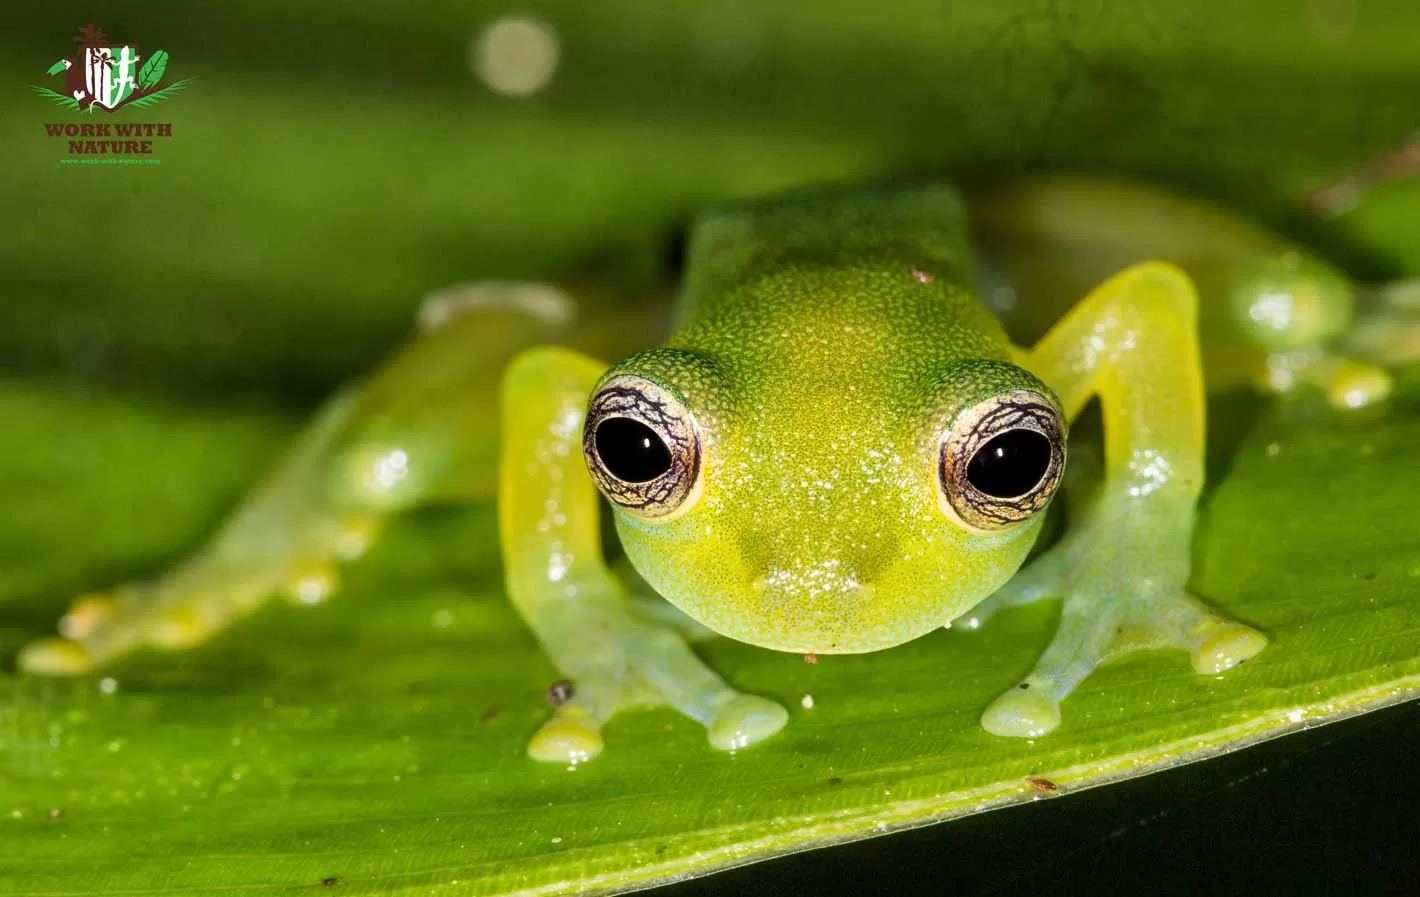 Diane's Bare-Hearted Glass Frog (Hyalinobatrachium dianae)-Cute Frog Breeds and Their Stories